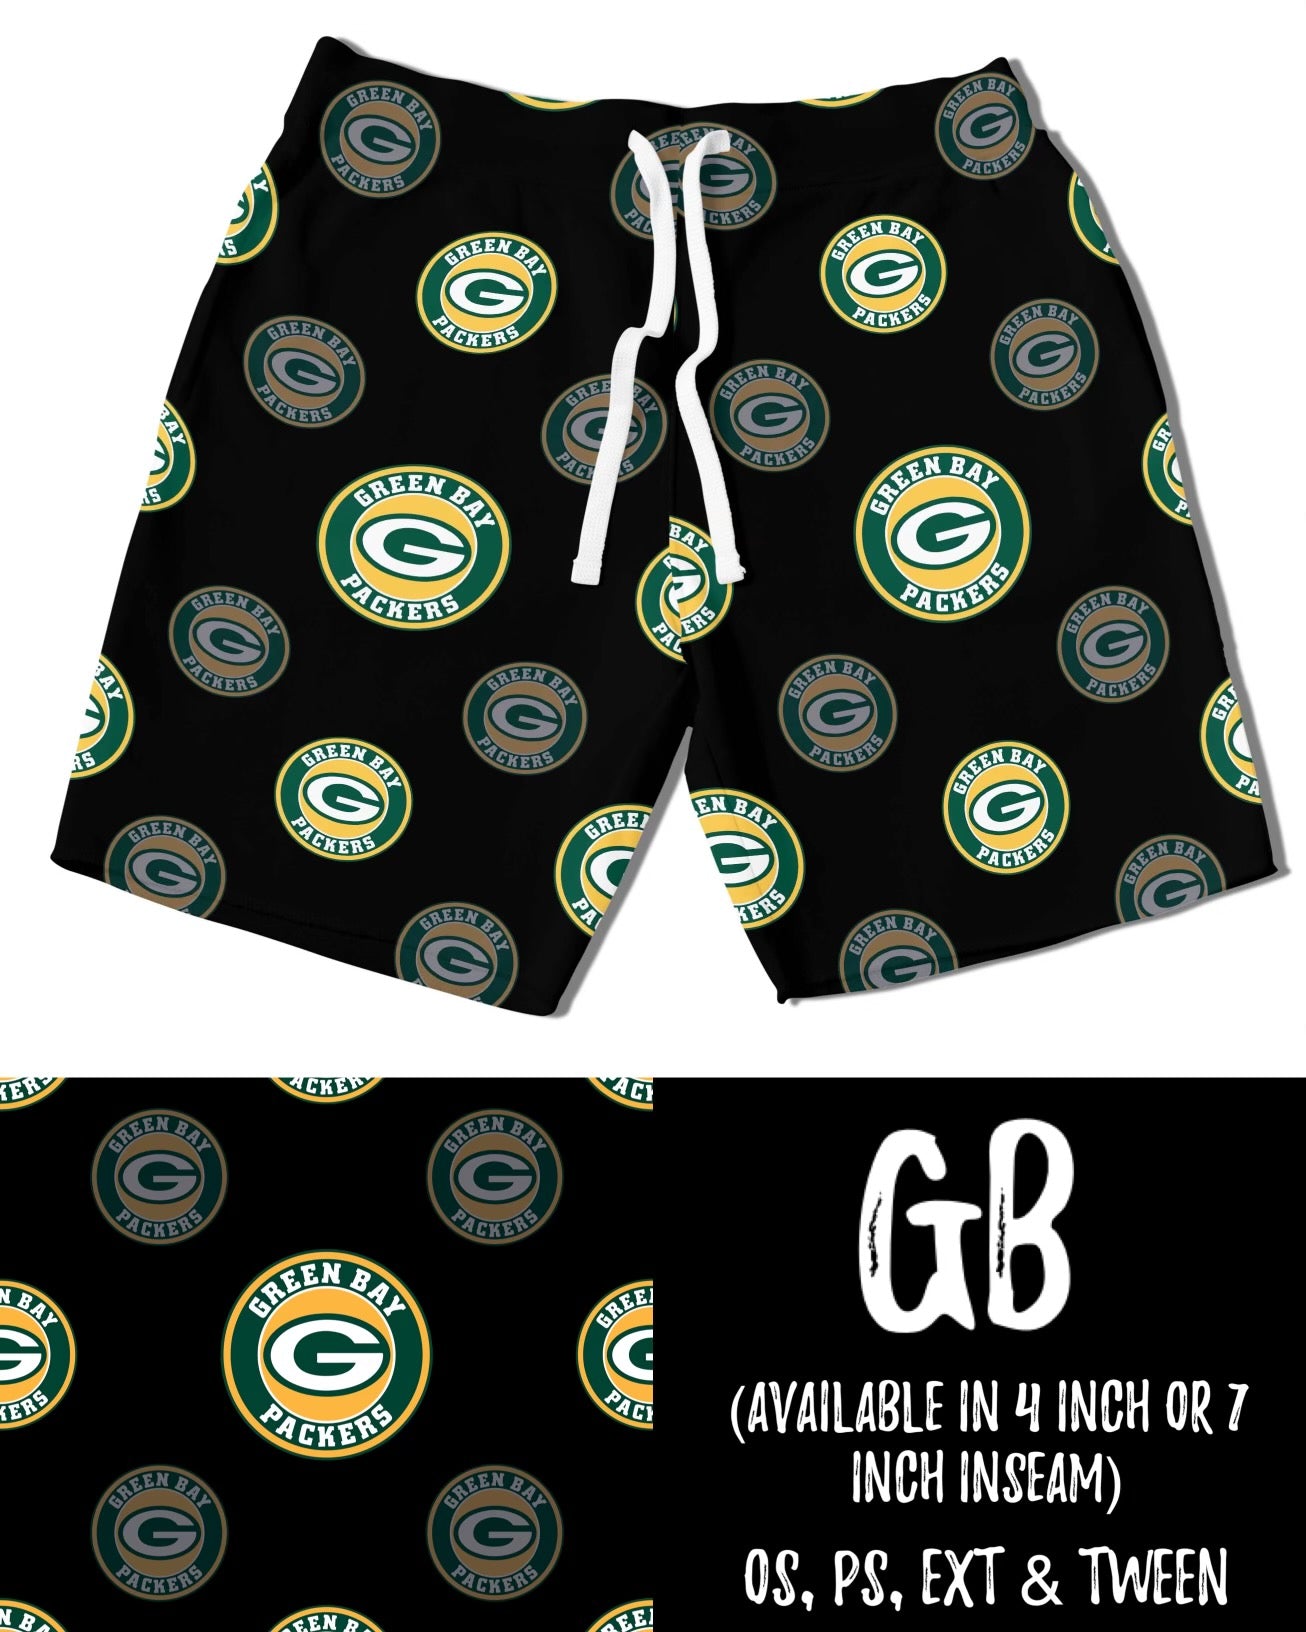 GB SHORTS (4 INCH AND 7 INCH)